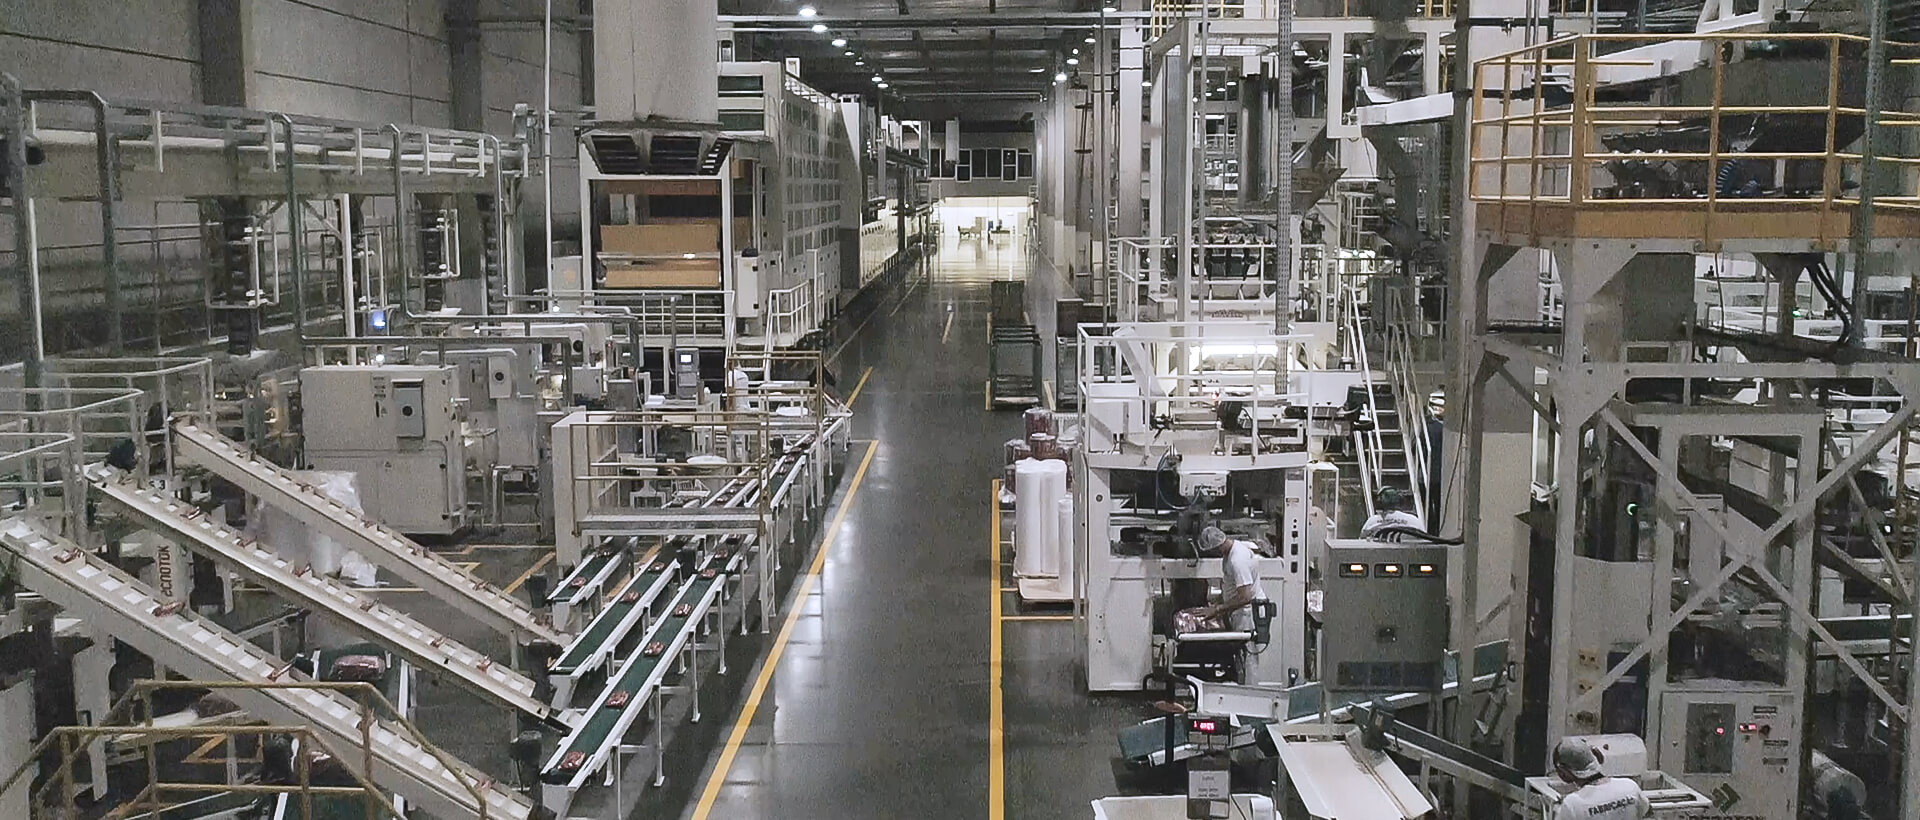 Ilustração Selmi has two modern manufacturing plants with state-of-the-art structures to offer the most innovative products for the Brazilian family. The plants are located in the cities of Sumaré (SP) and Rolândia (PR), with fully automated machines and equipment, from the selection of raw materials to the packaging process.